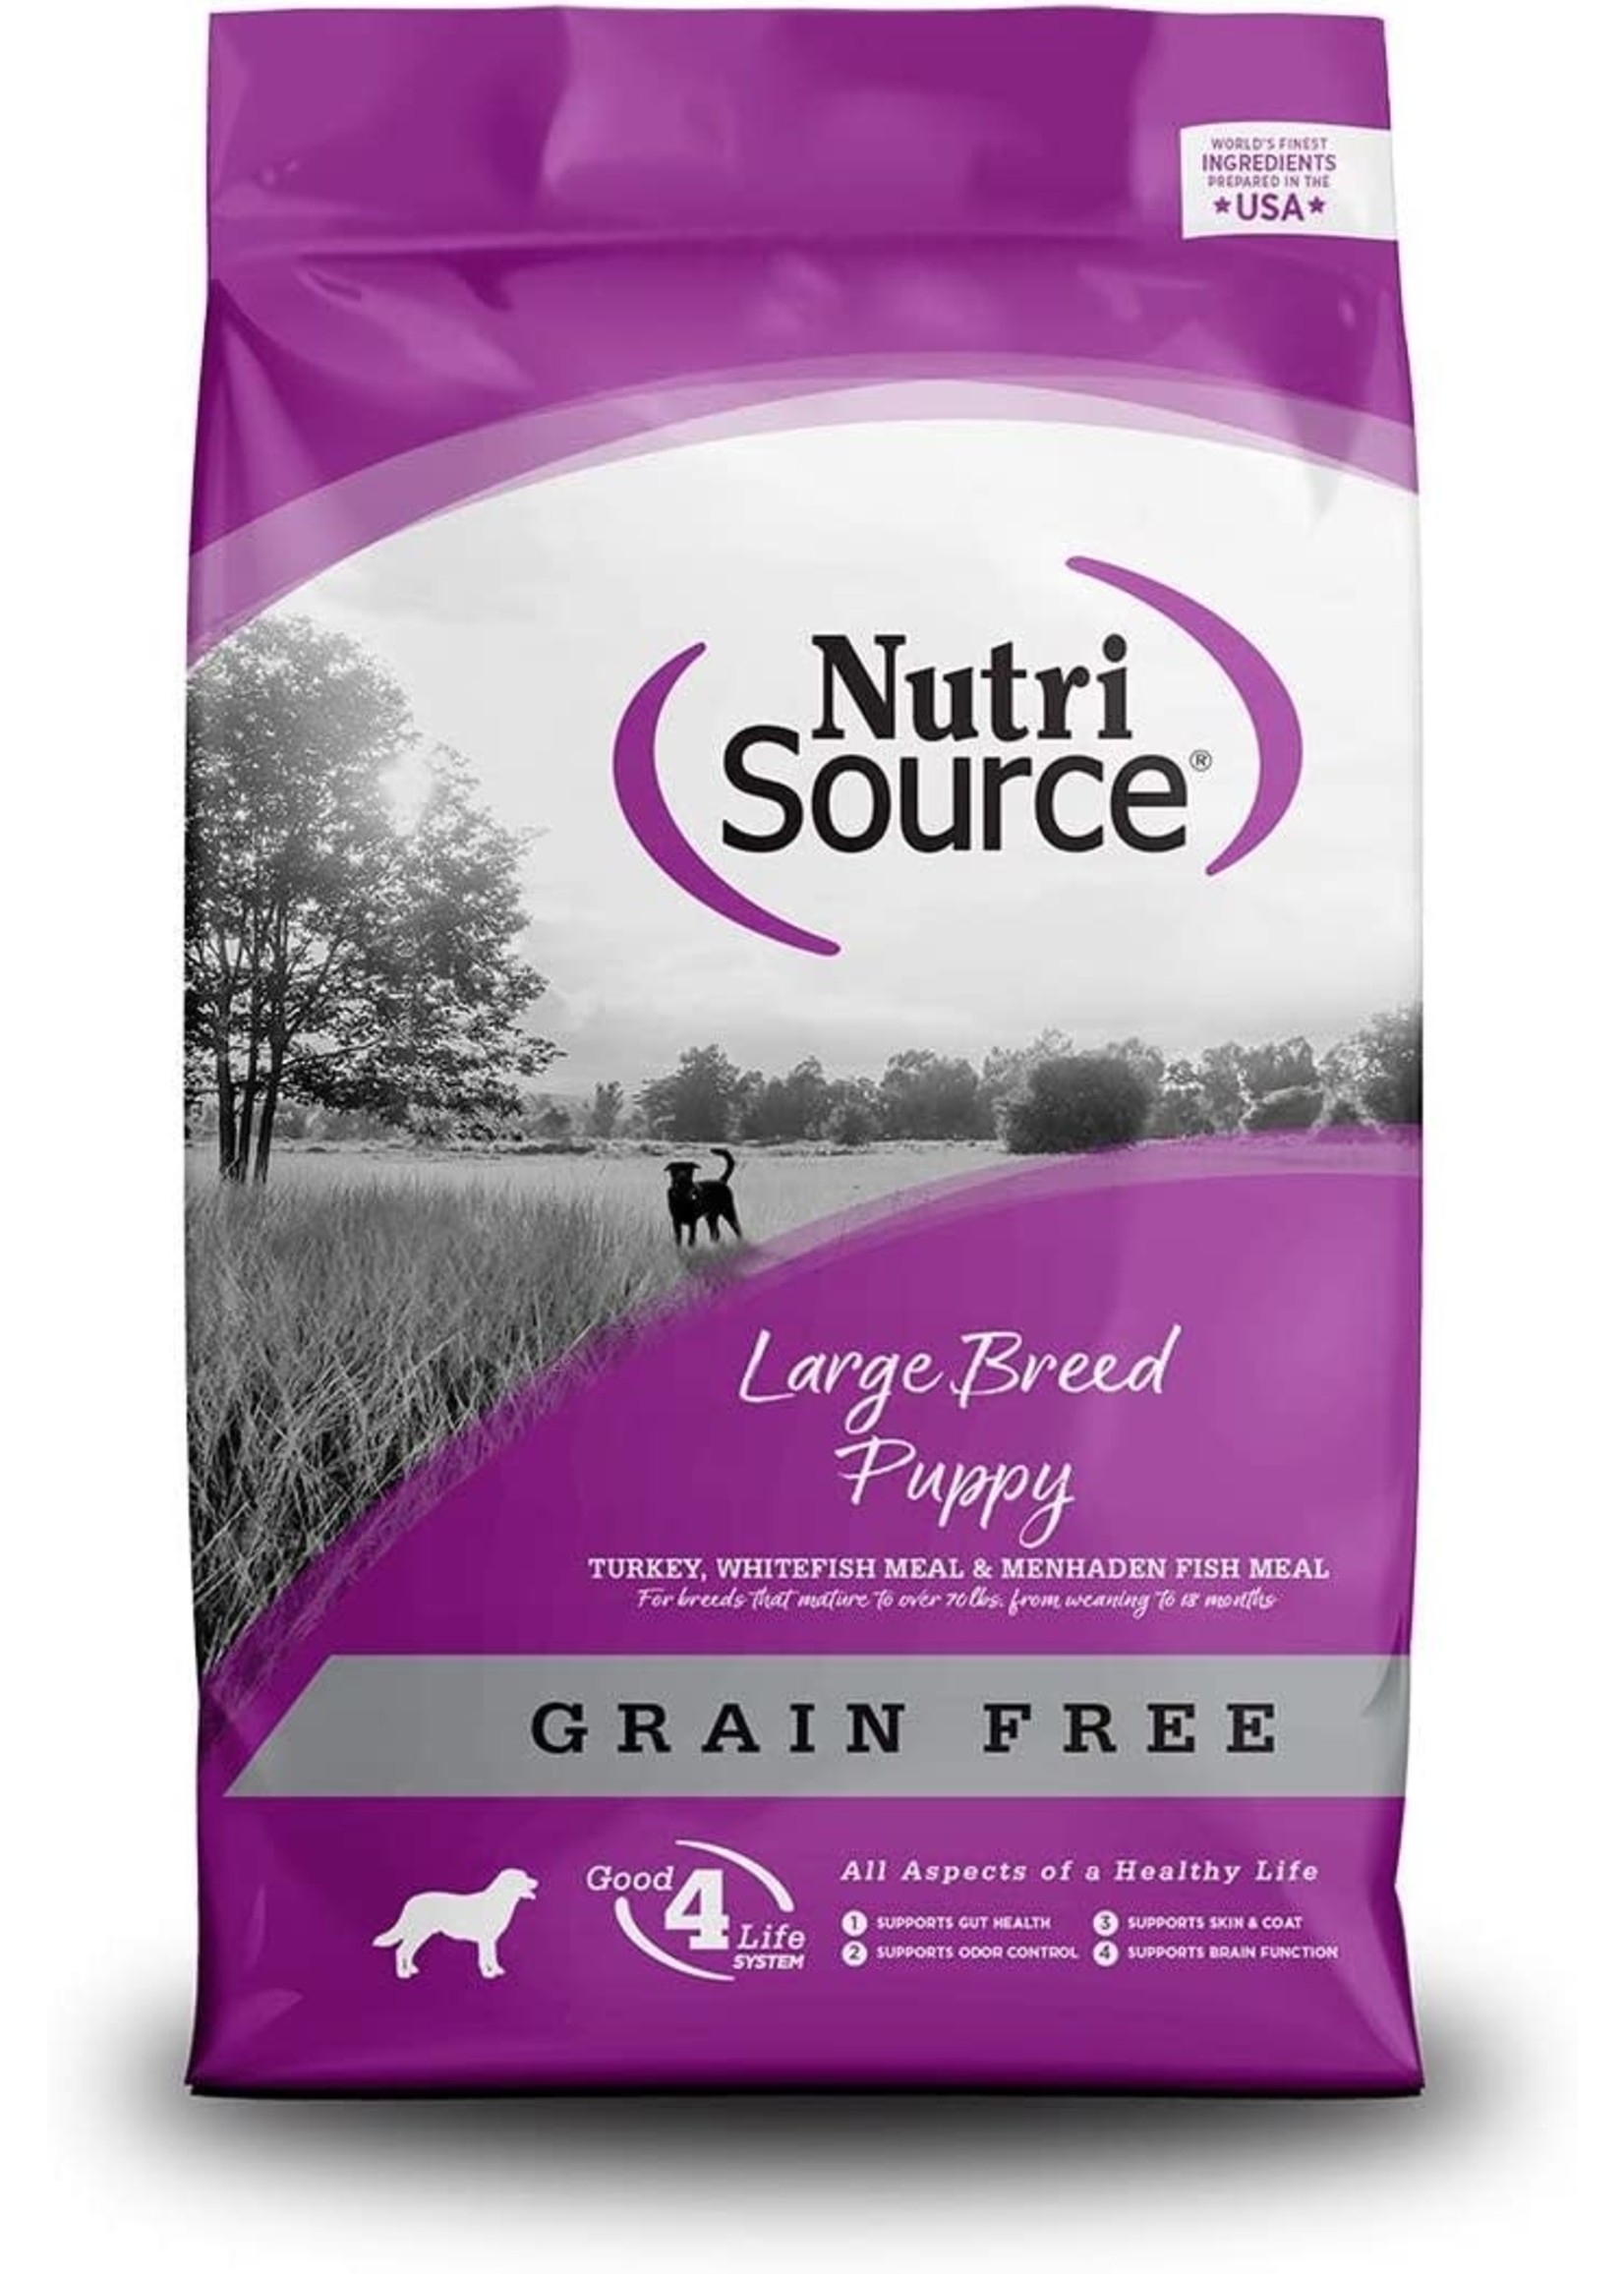 Nutrisource Grain Free Puppy Large Breed 30 lbs